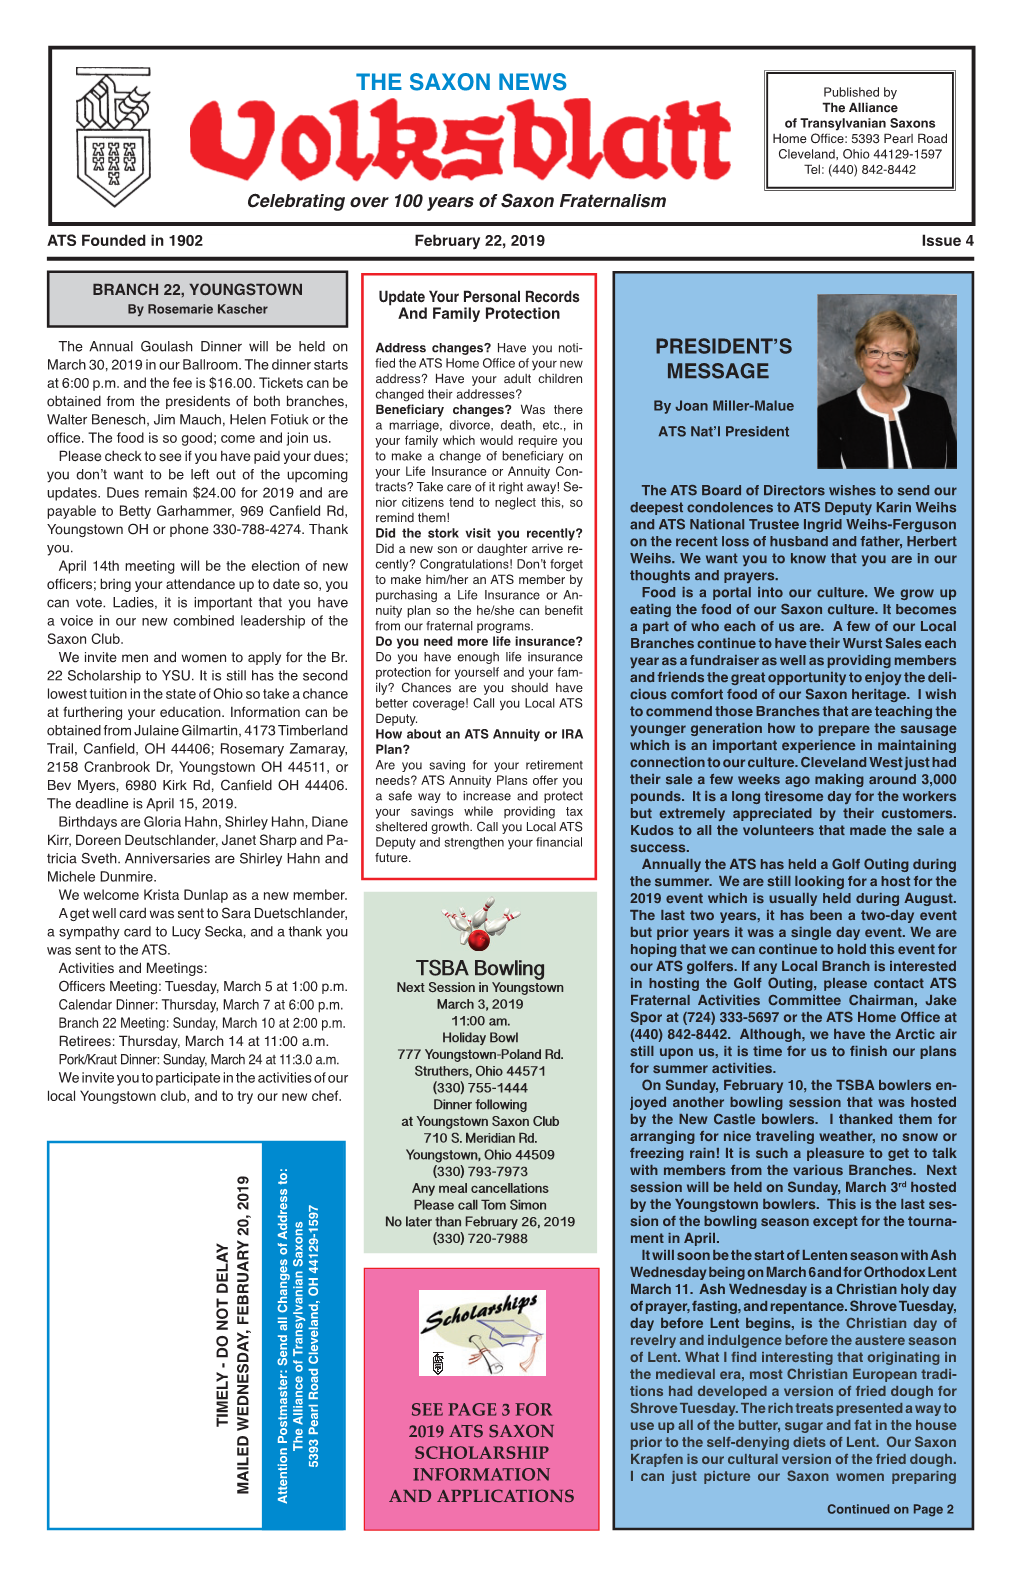 February 22, 2019 Issue 4